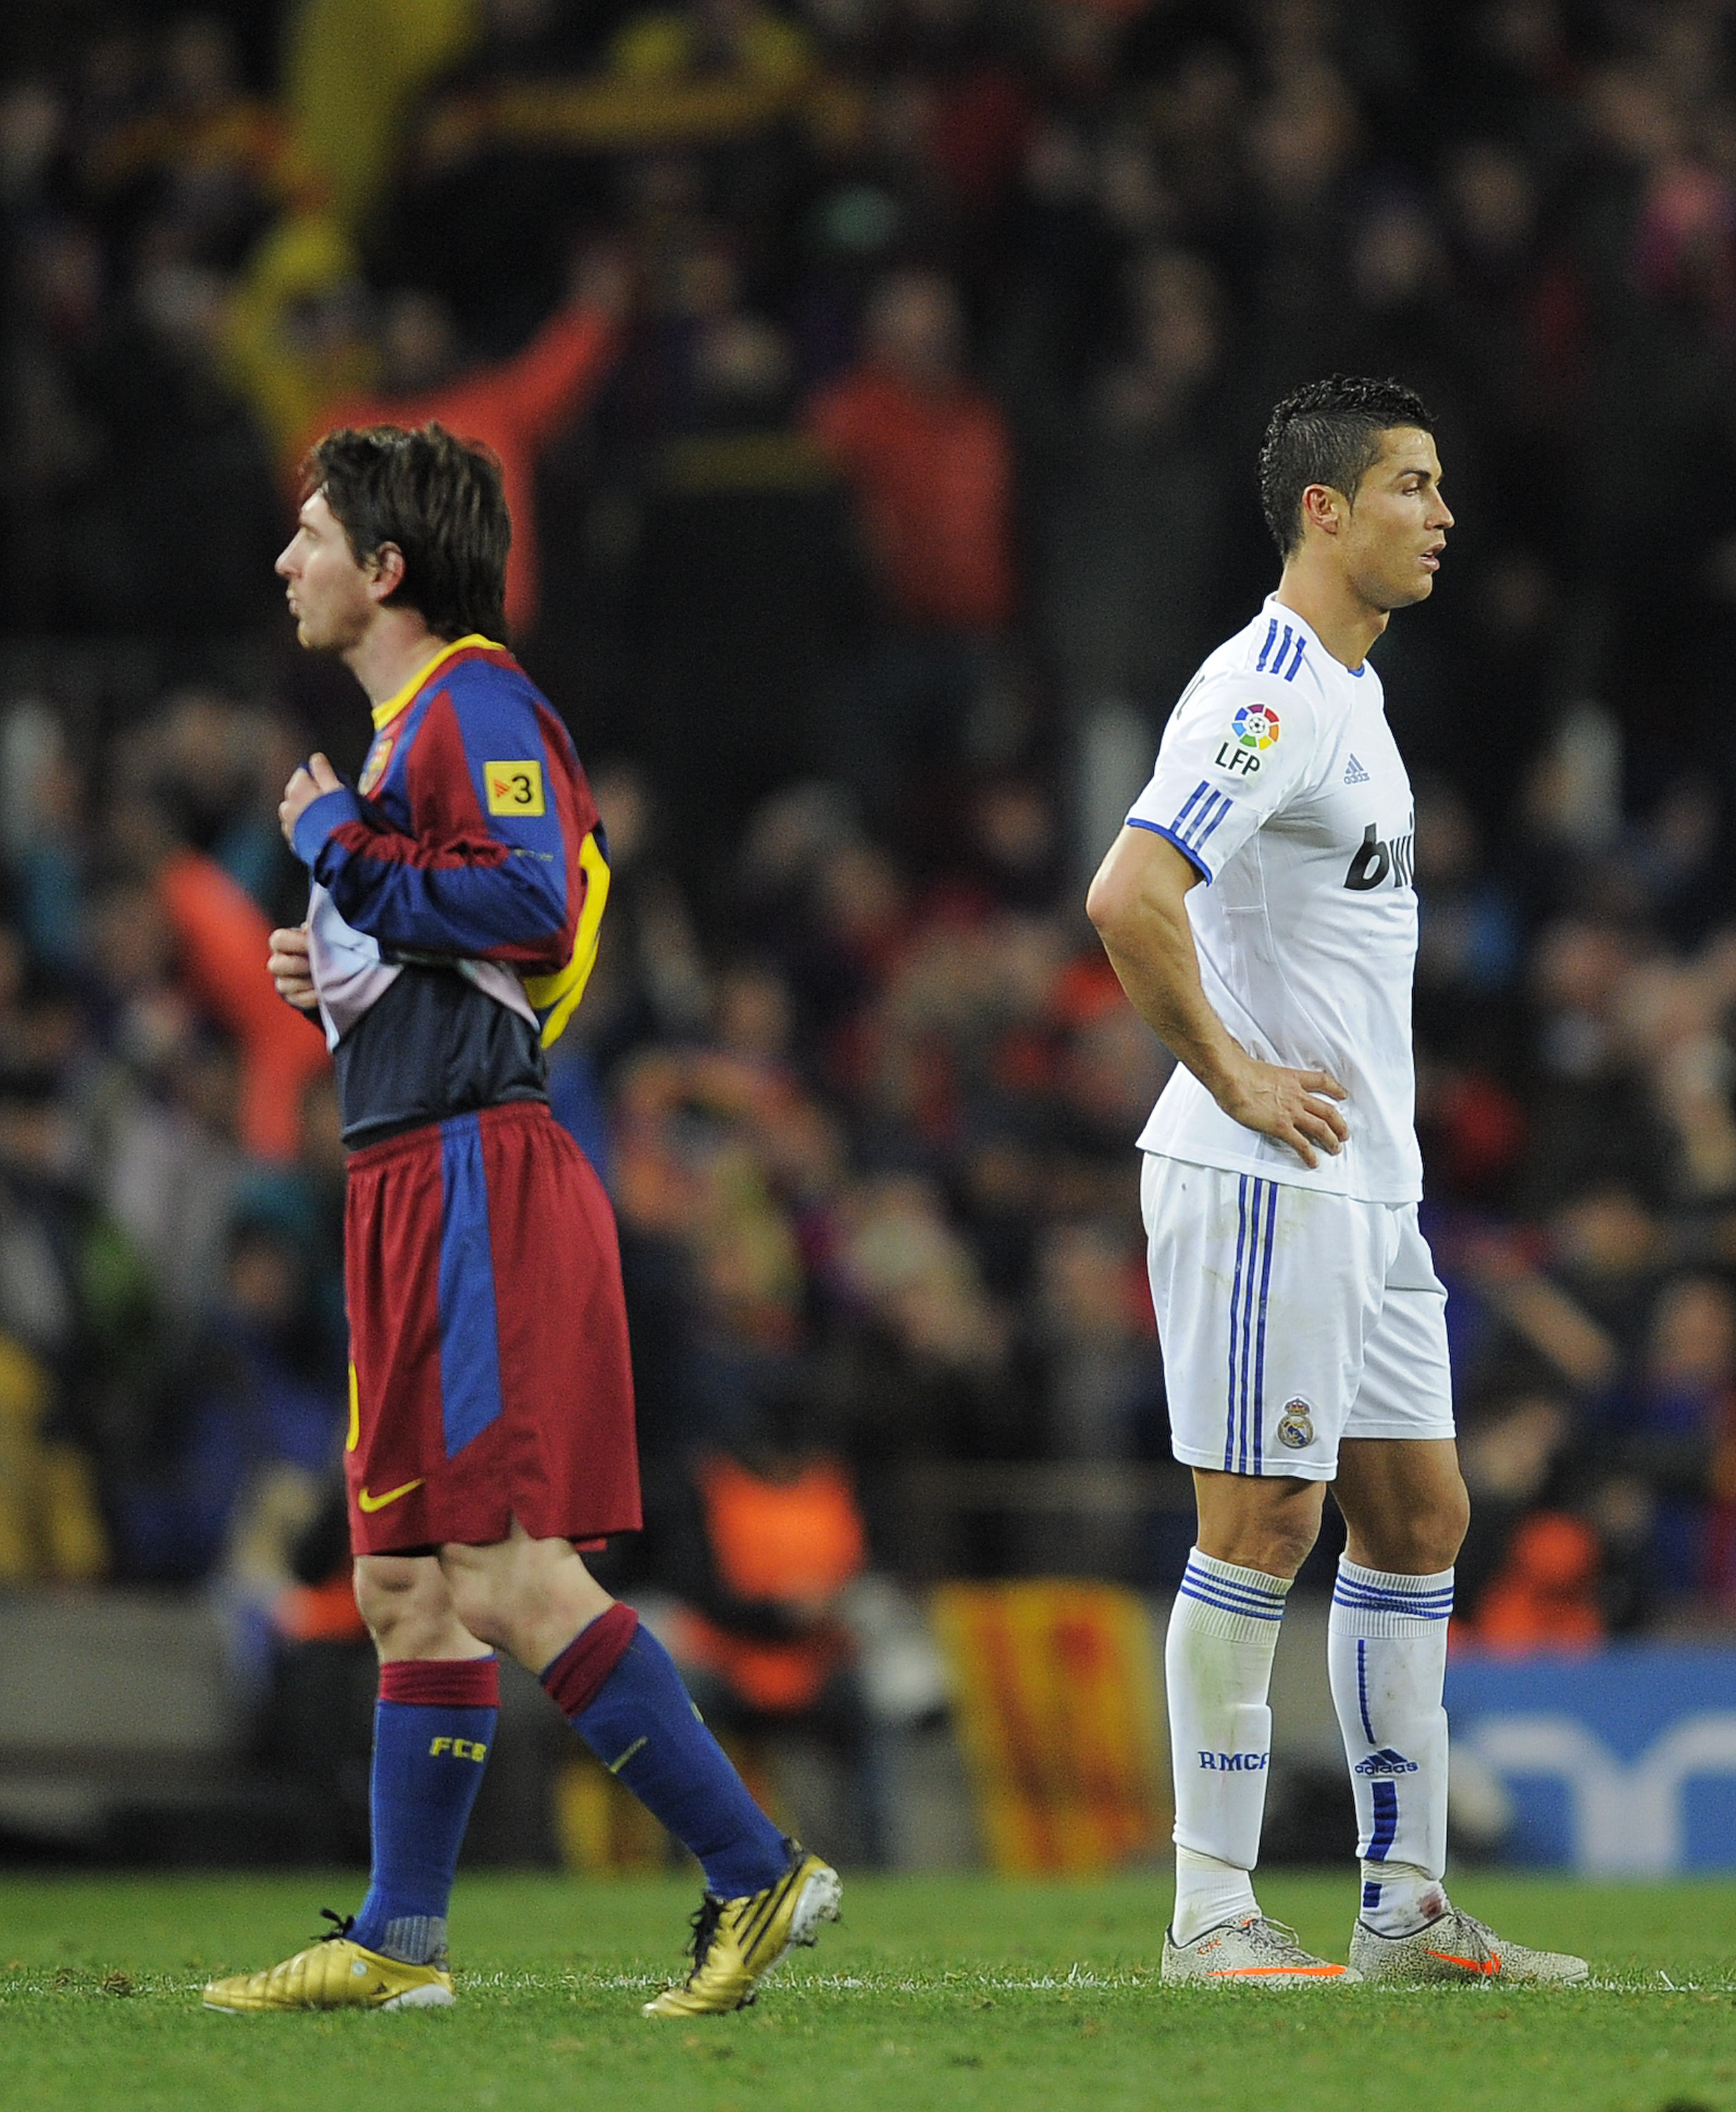 BARCELONA, SPAIN - NOVEMBER 29:  Cristiano Ronaldo of Real Madrid (R) and Lionel Messi of FC Barcelona look on during the La Liga match between Barcelona and Real Madrid at the Camp Nou Stadium on November 29, 2010 in Barcelona, Spain.  Barcelona won the